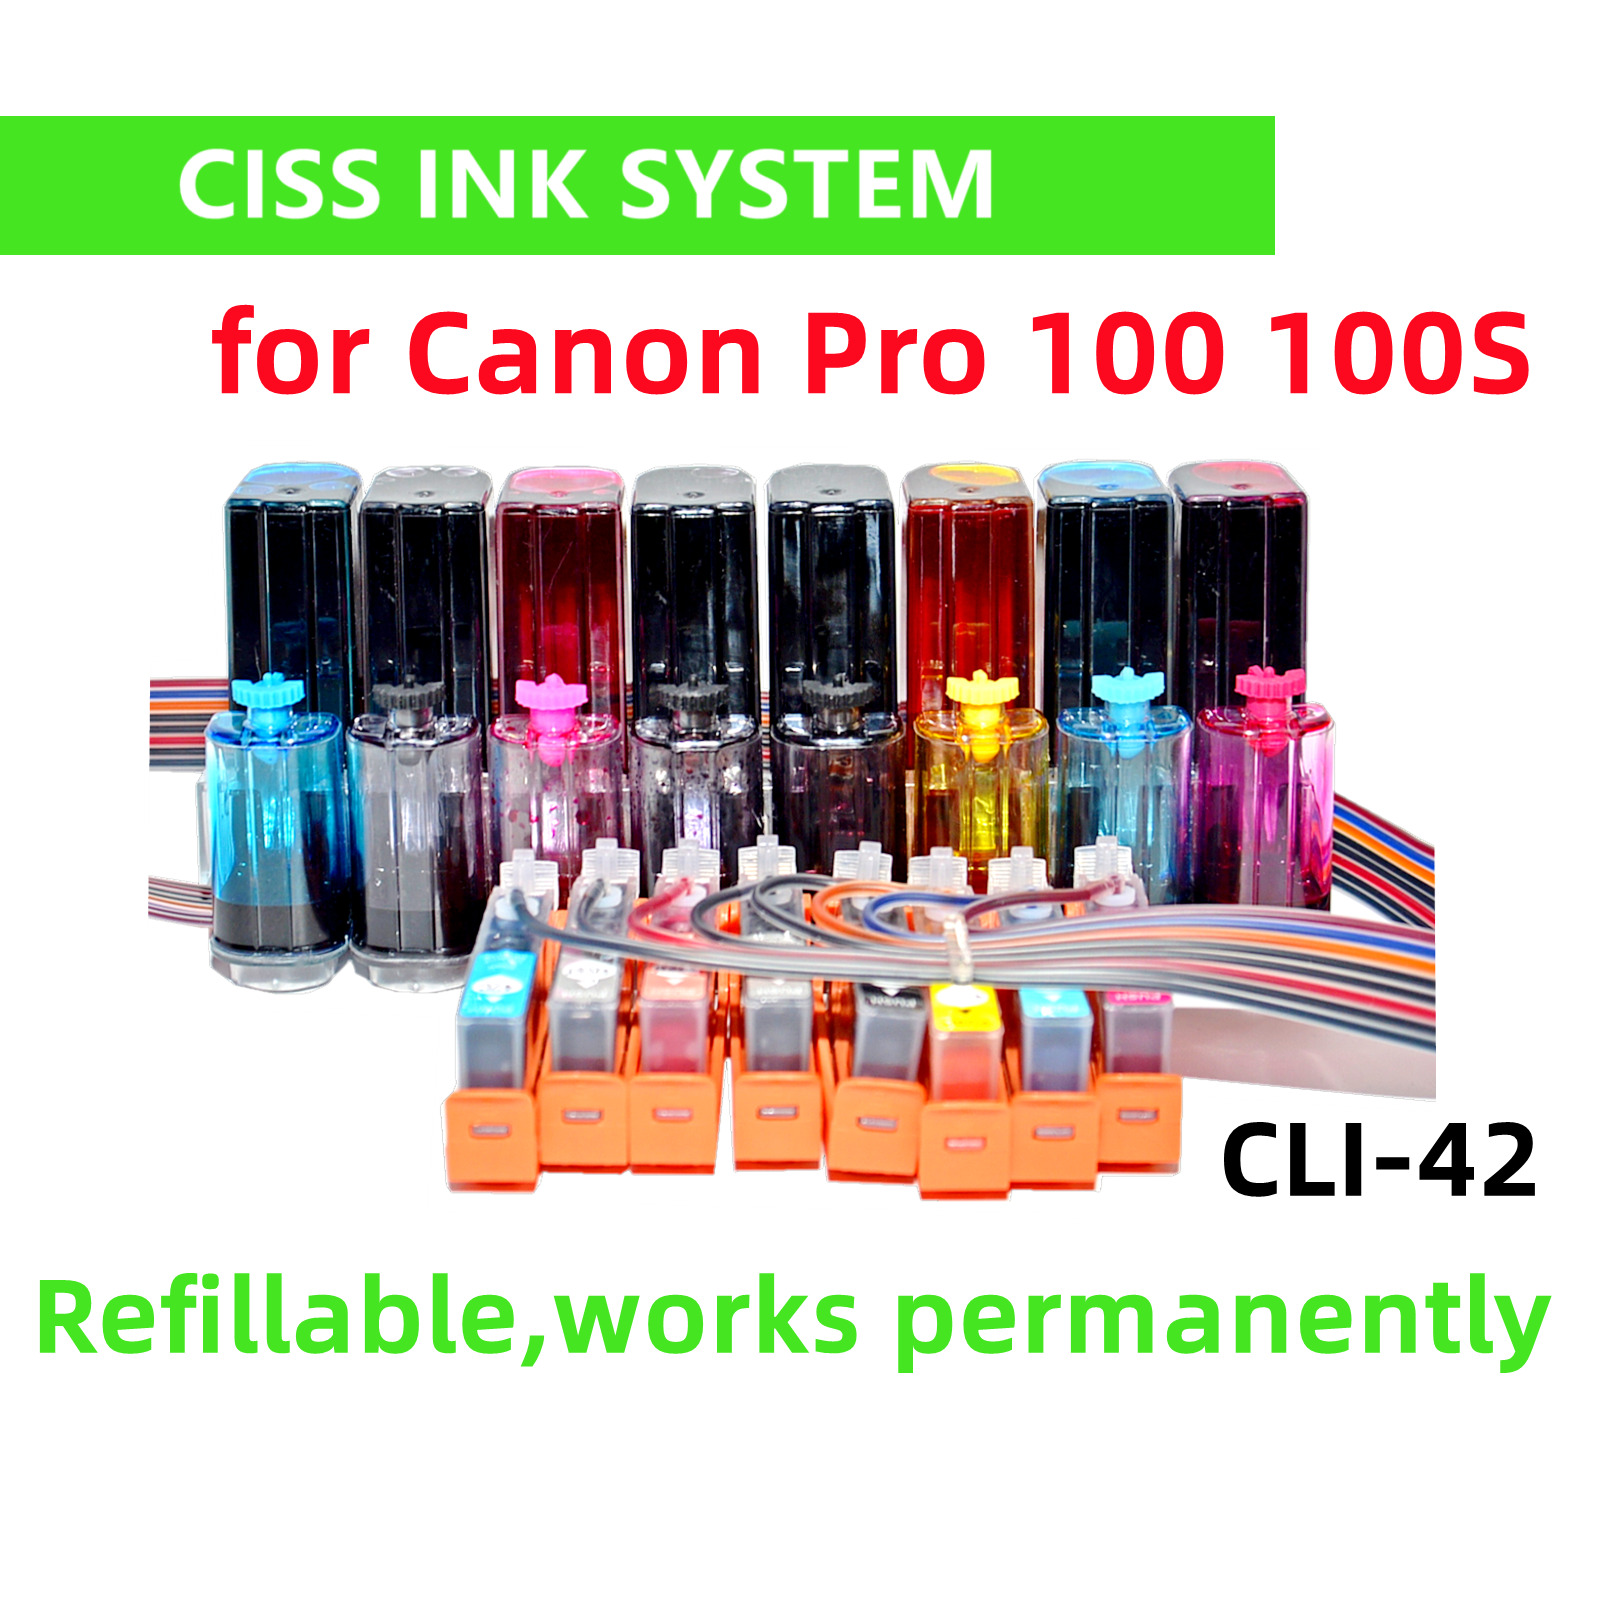 Refillable CIS CISS ink system for Canon Pro 100 100S Printer cli-42 cartridge